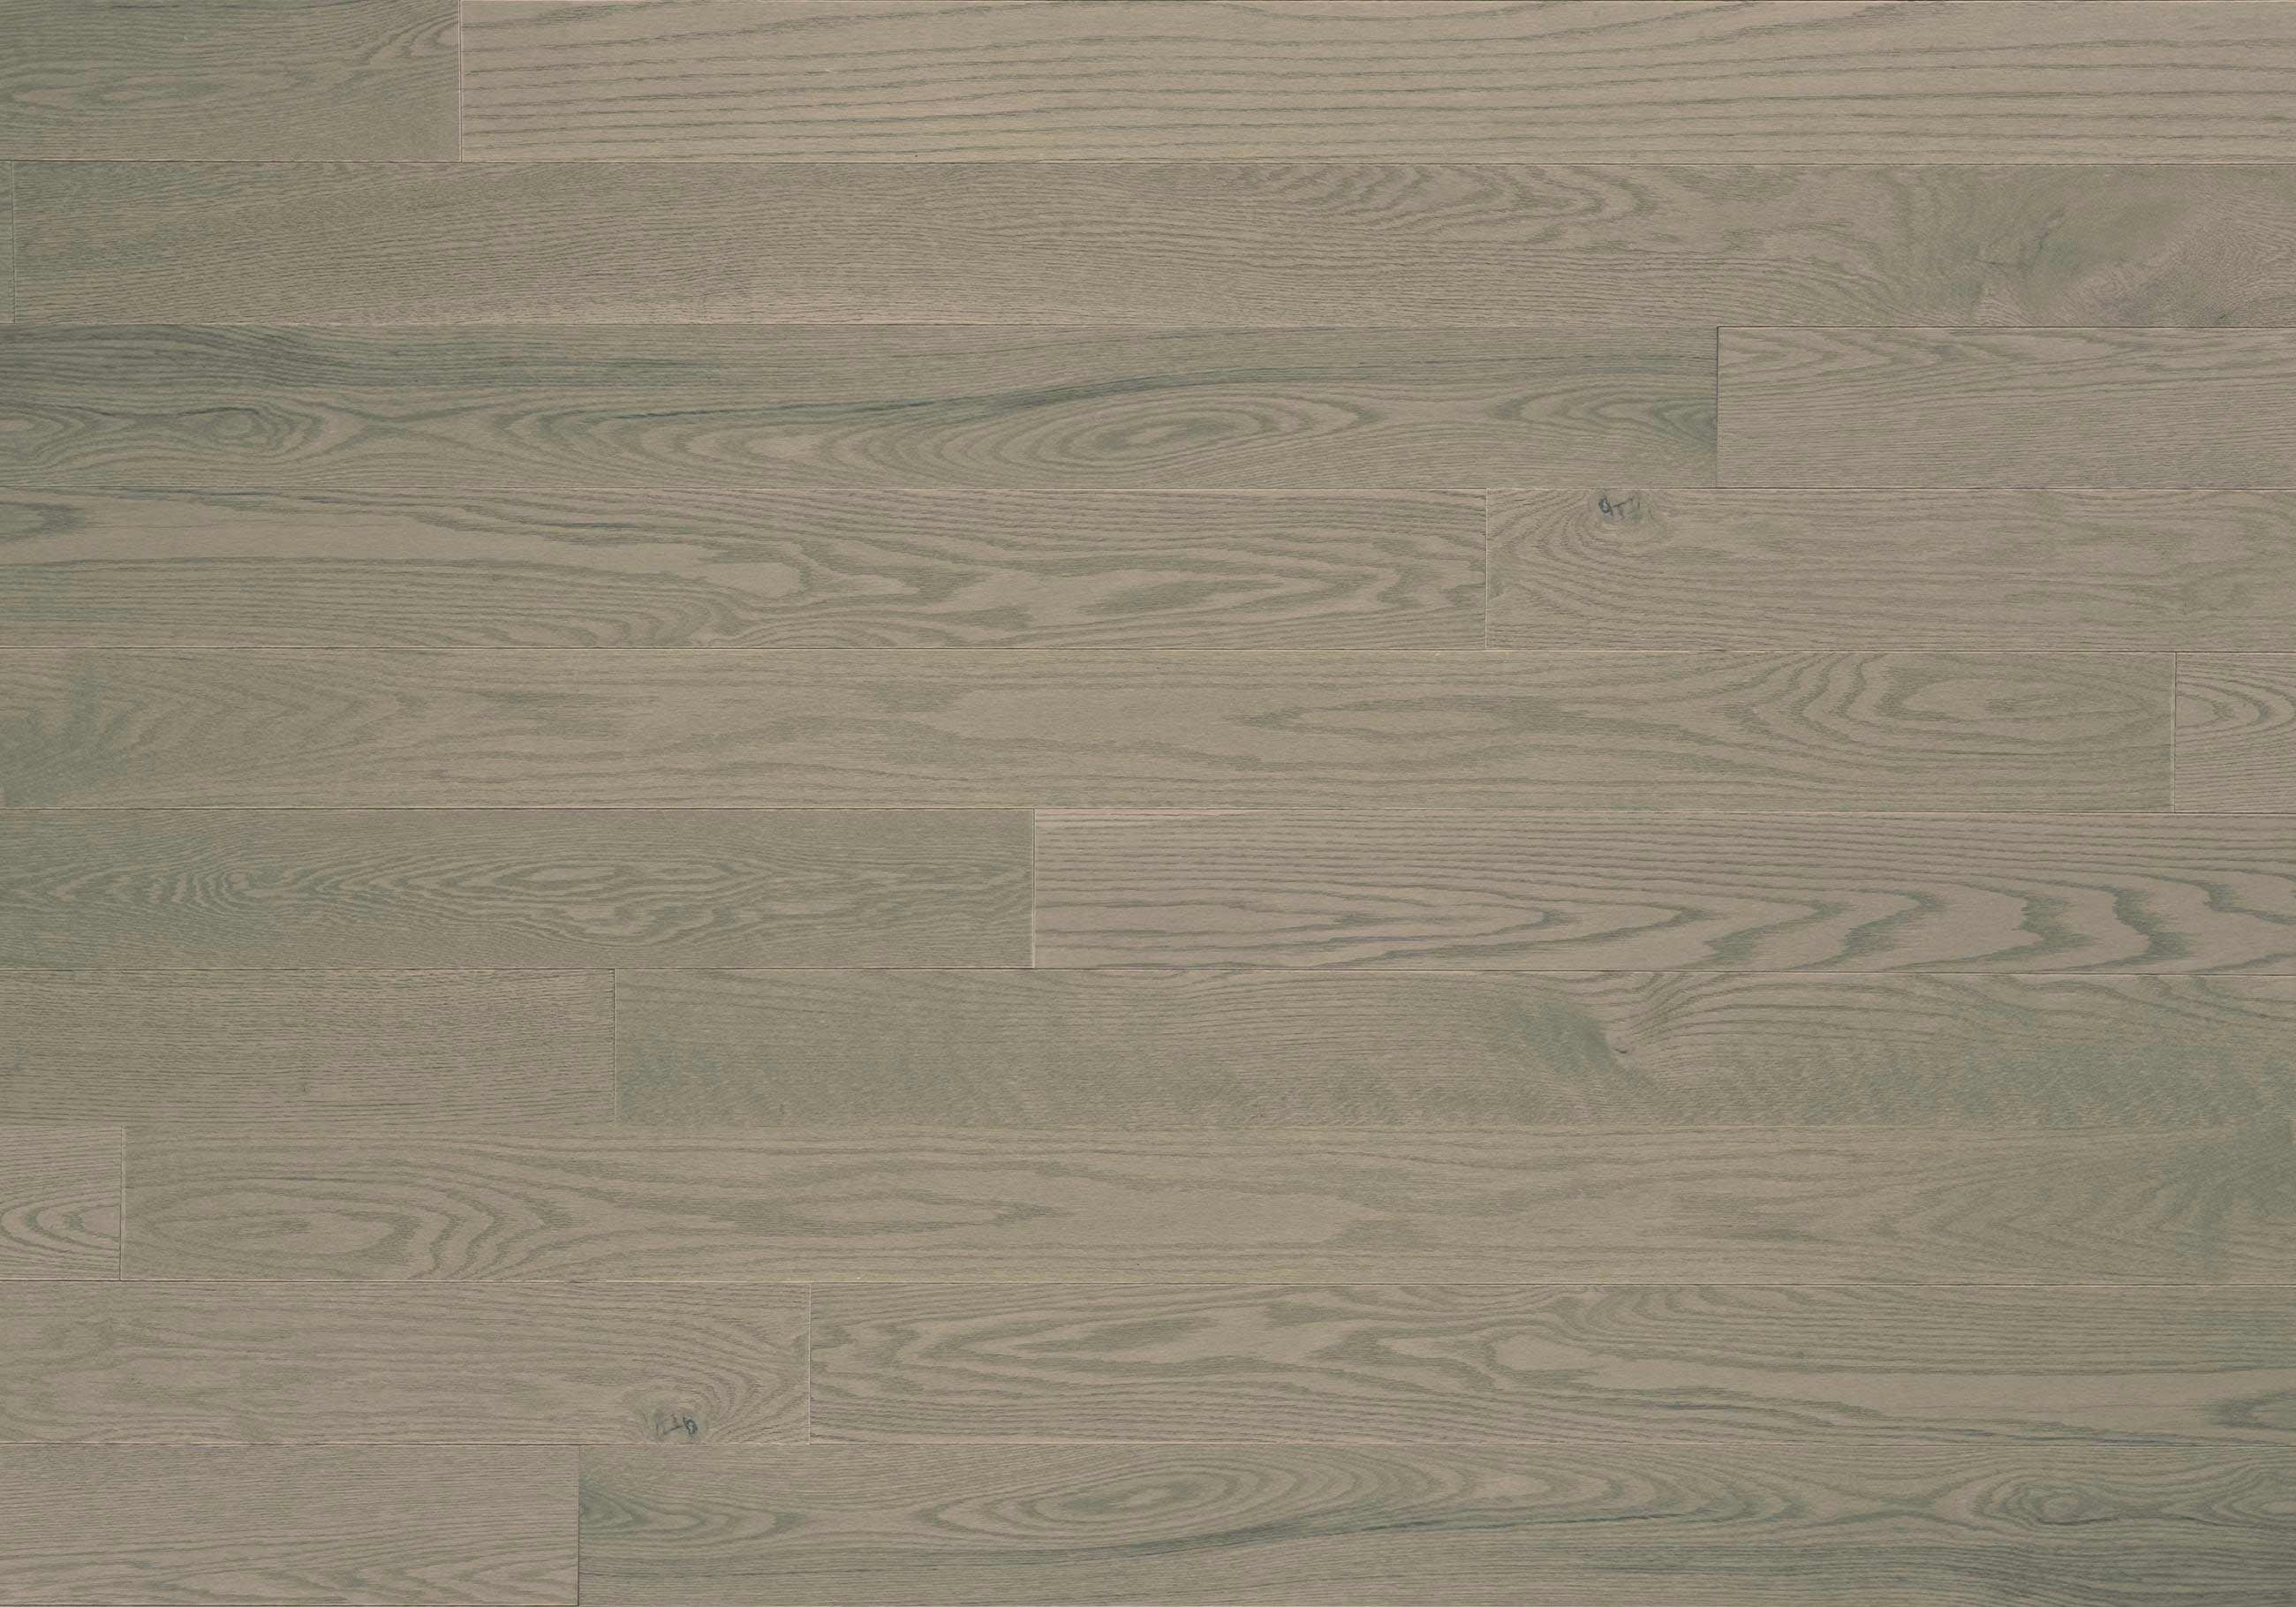 grey maple hardwood floors of nostalgia ambiance red oak character lauzon hardwood flooring regarding discover lauzons hardwood flooring with our nostalgia this magnific red oak flooring from our authentik series will enhance your decor with its marvelous